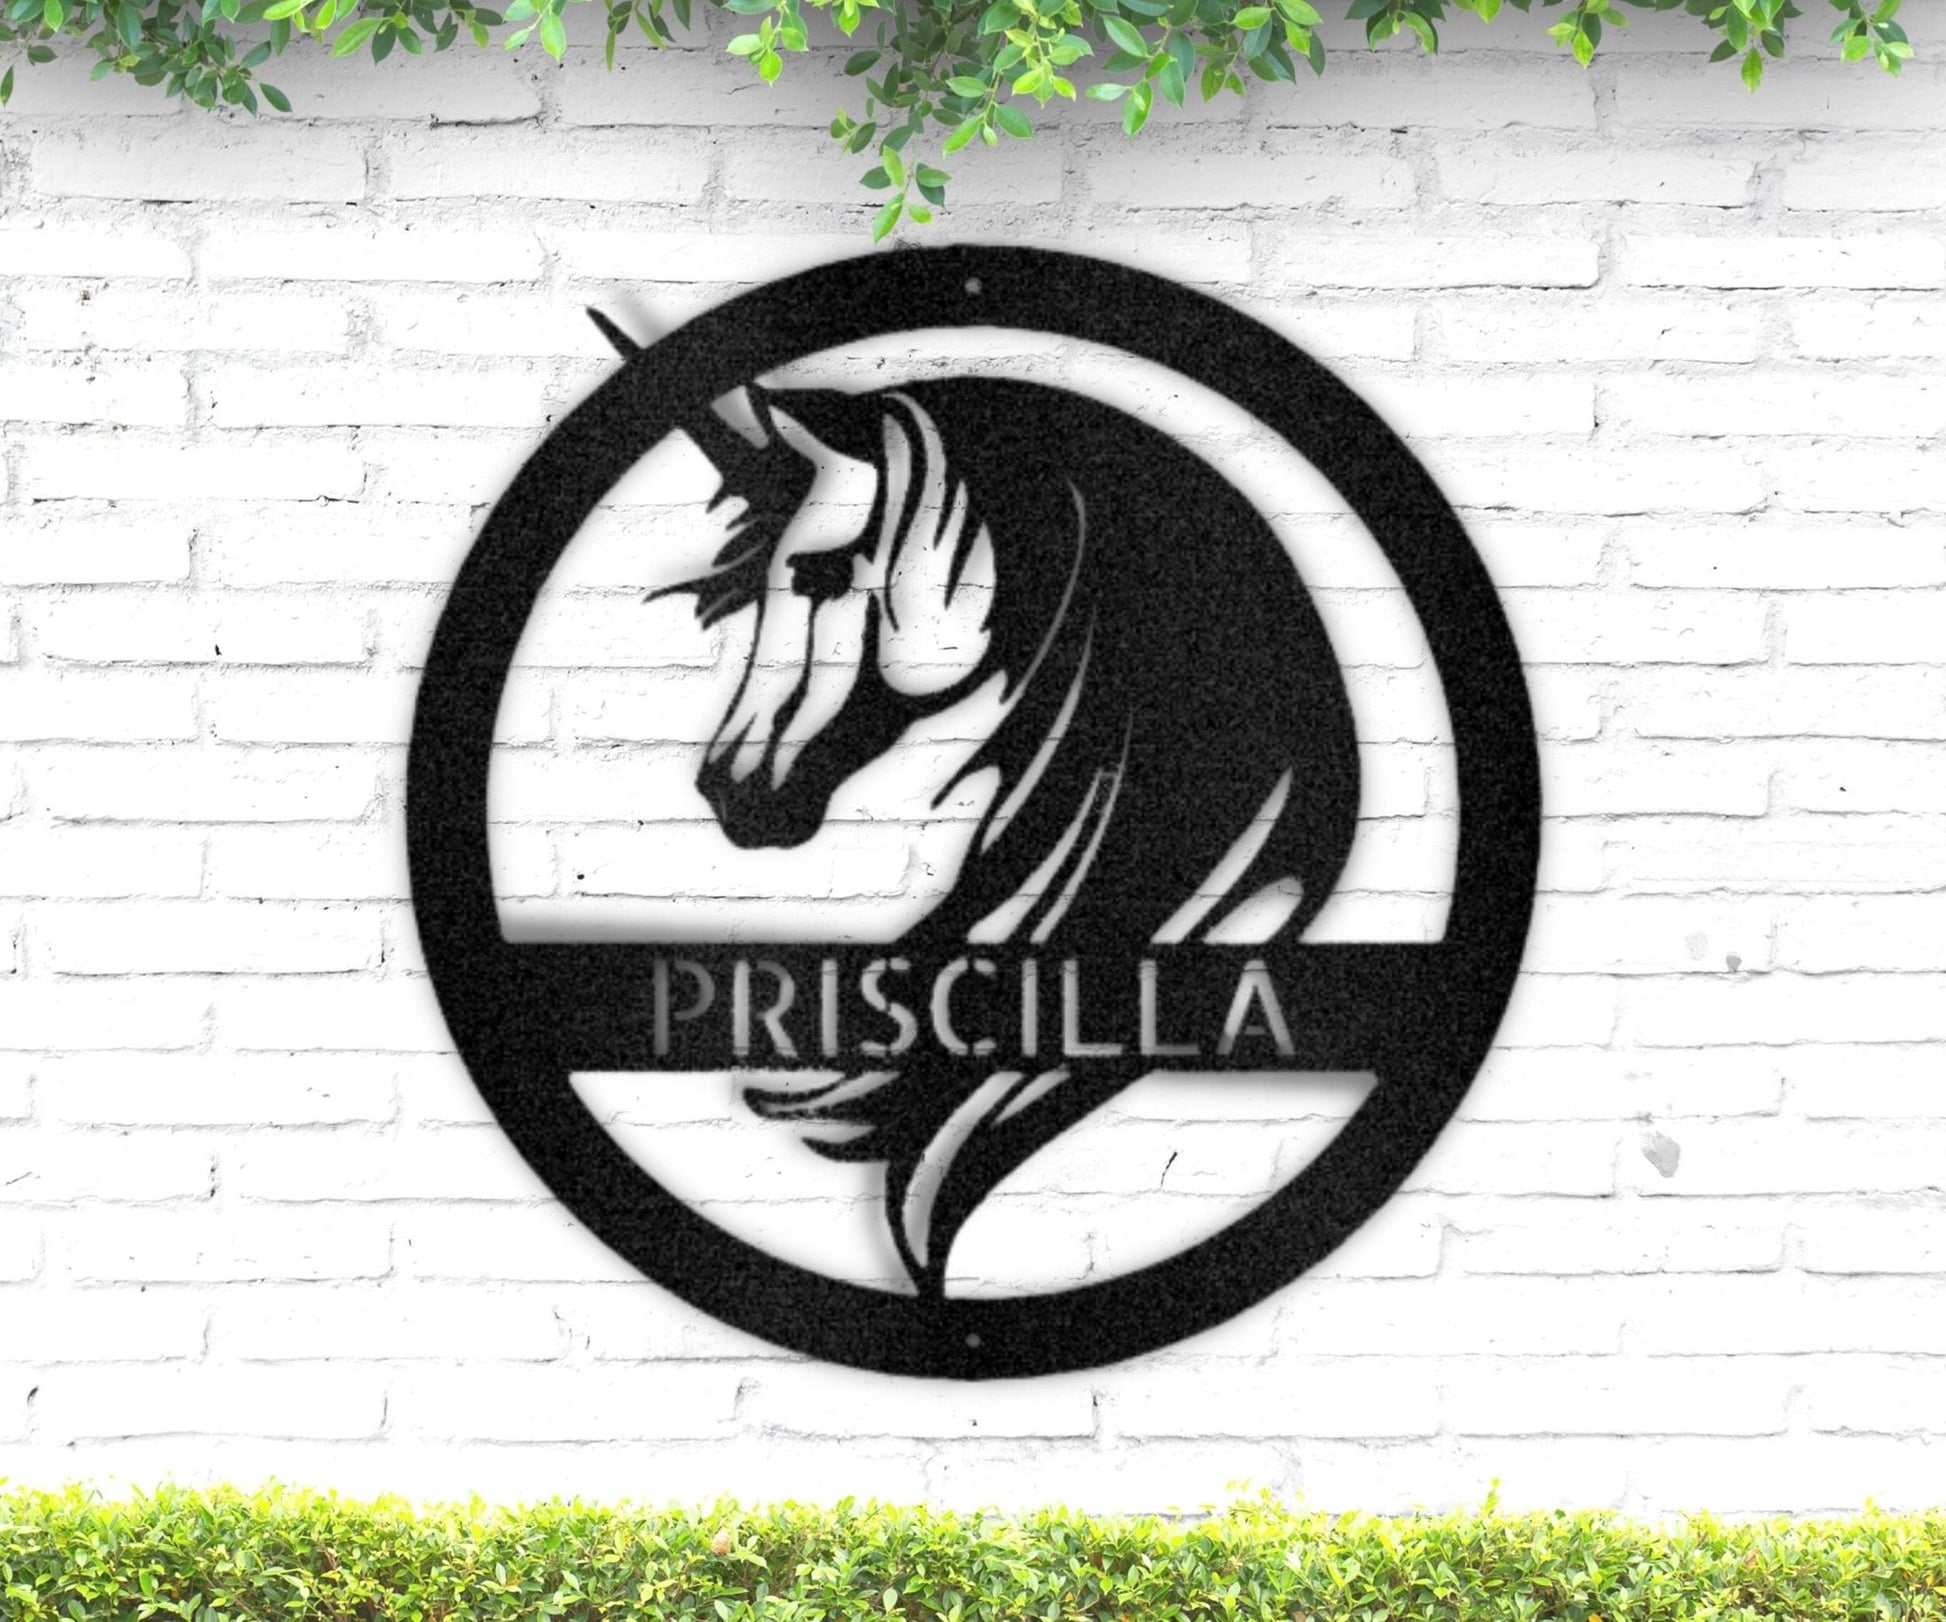 Custom Unicorn Metal Wall Art - Enchanting Bedroom Decor for Kids and Housewarming Personalized Gifts - Stylinsoul